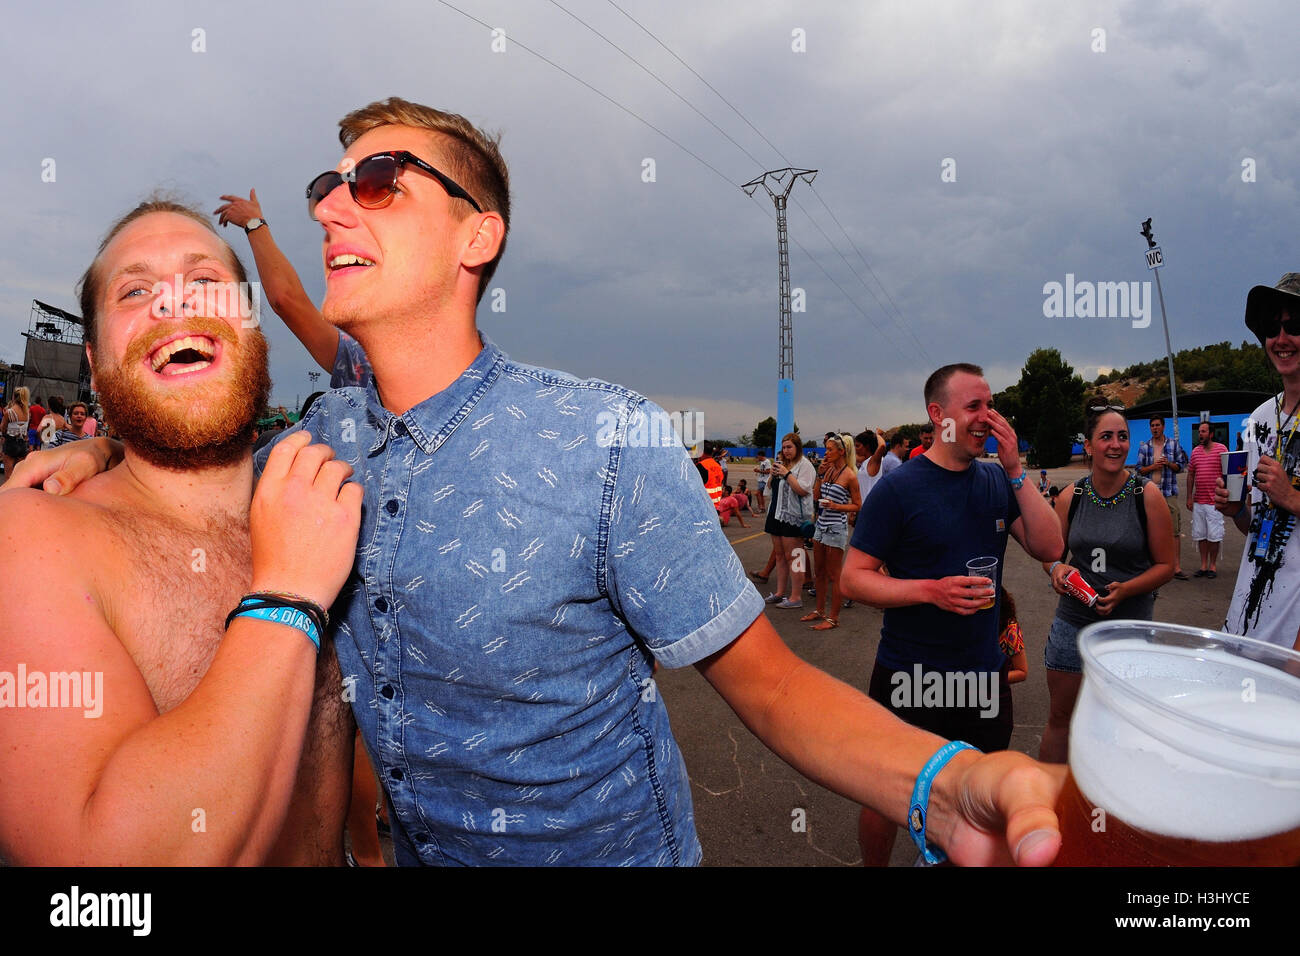 BENICASSIM, SPAIN - JULY 18: Crowd in a concert at FIB Festival on July 18, 2014 in Benicassim, Spain. Stock Photo